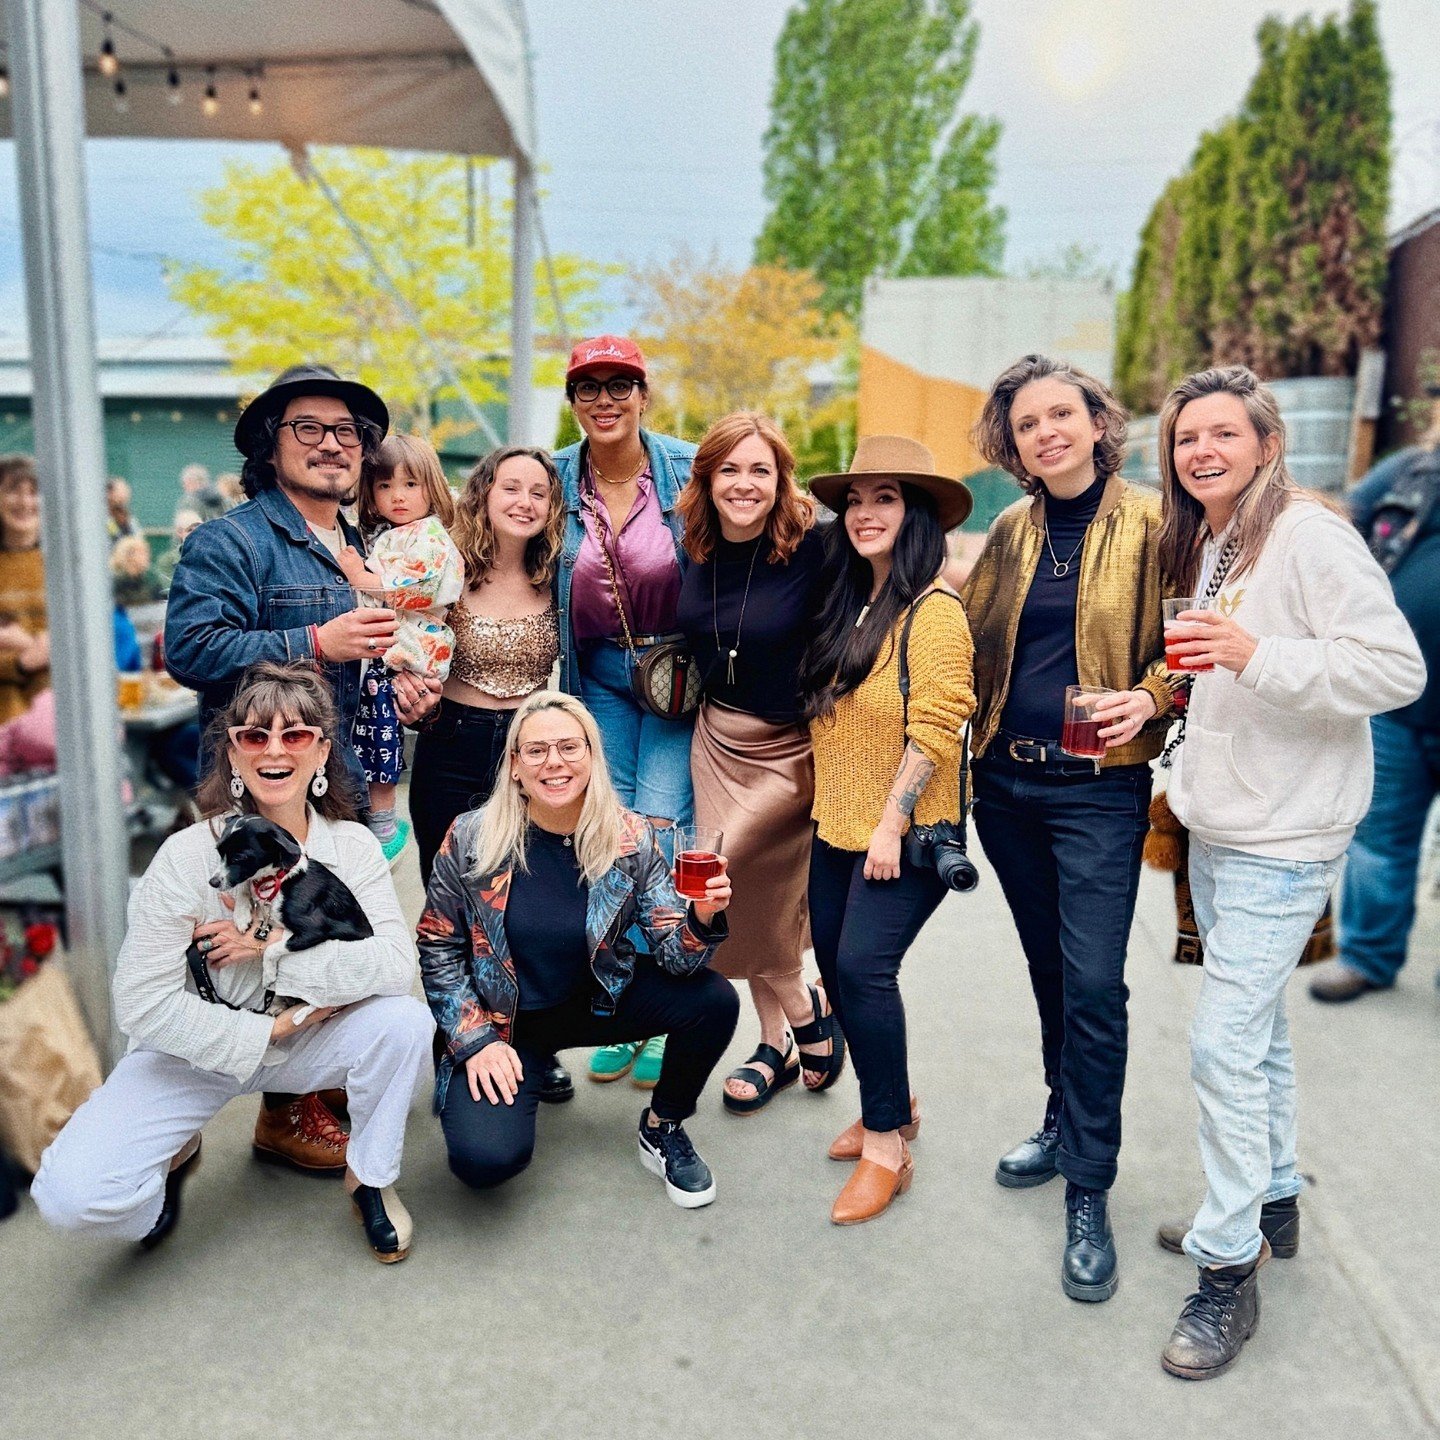 What an incredible turnout! Thank you to everyone who joined us and made the @thunderpussiez cider release party last weekend such a blast. The cider and cider slushies were flowing, and good times were had by all.⁠
⁠
A huge shoutout to the Thunderpu